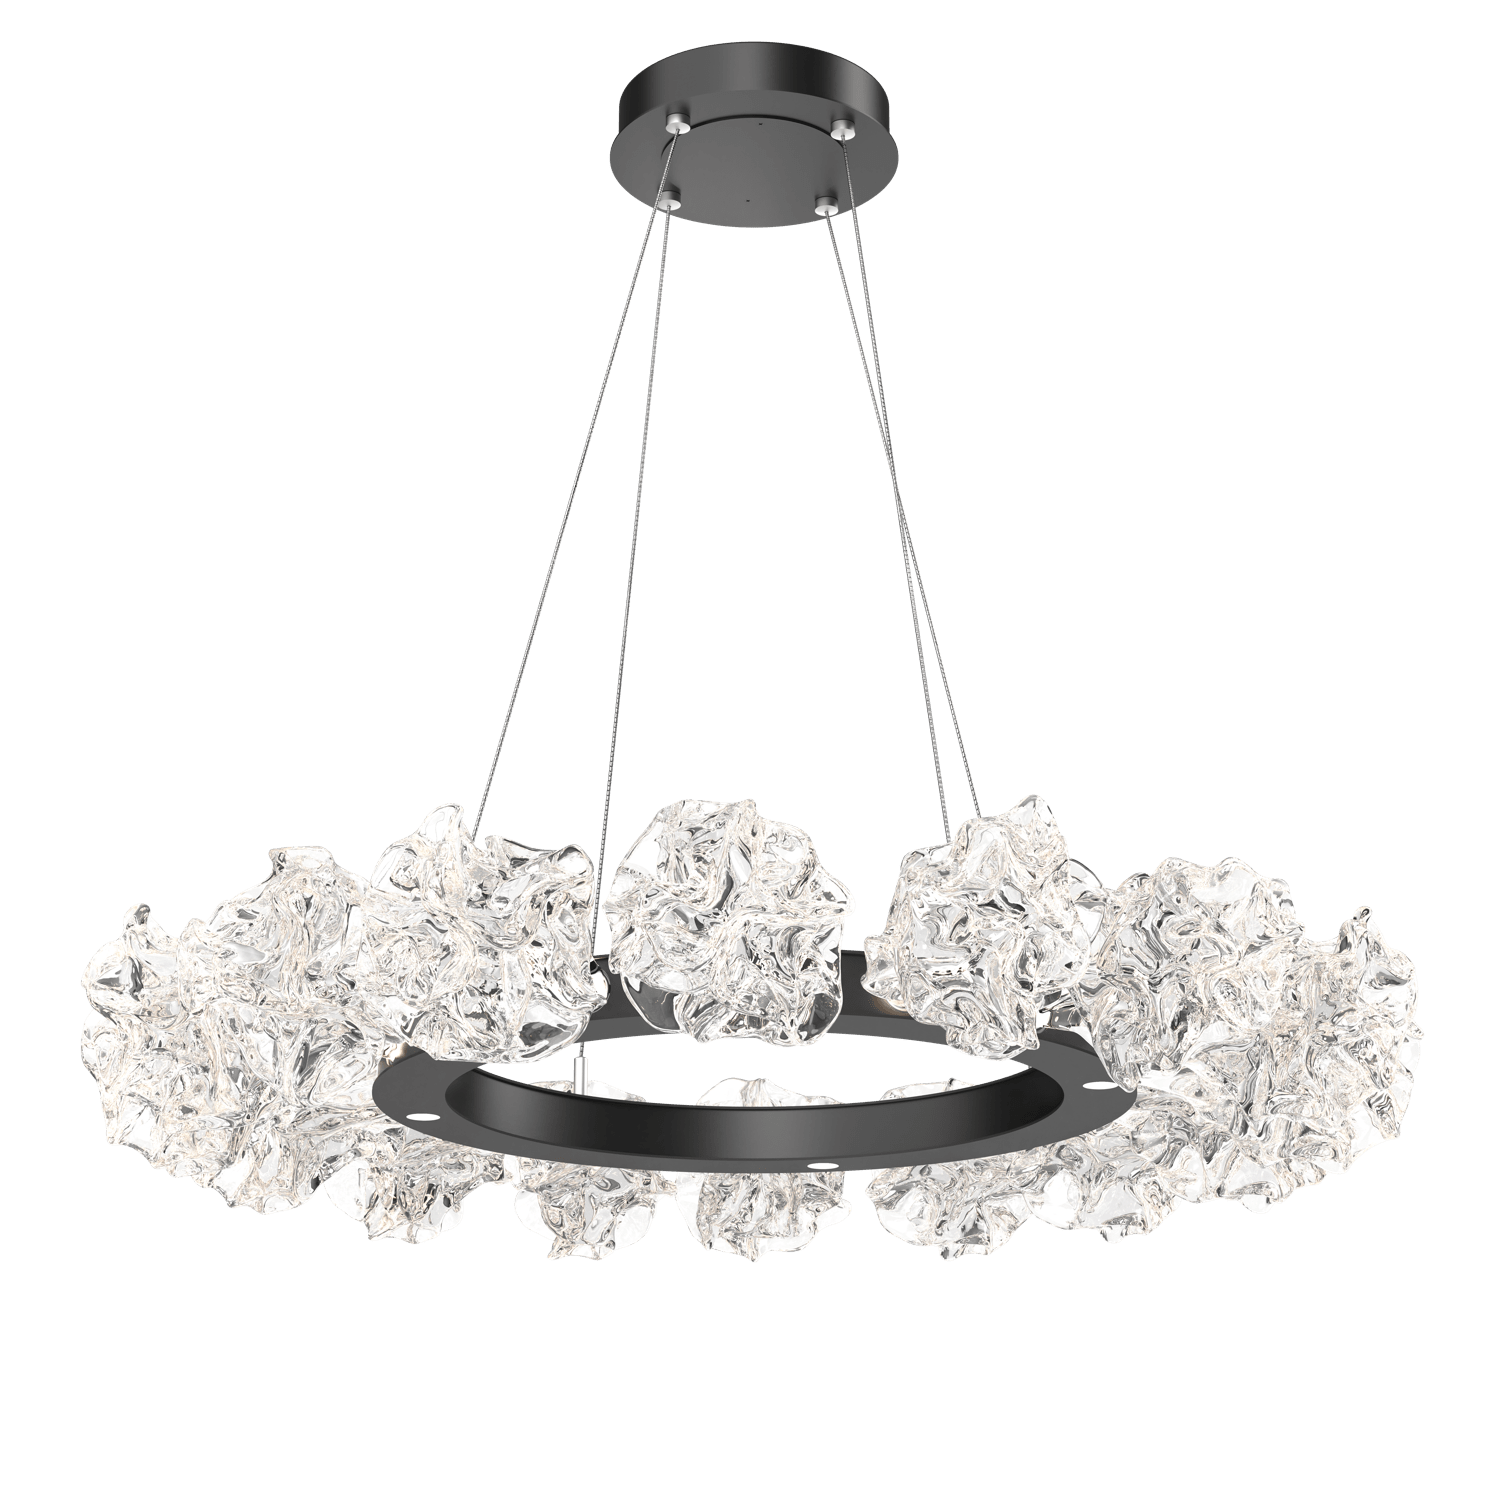 CHB0059-36-MB-Hammerton-Studio-Blossom-36-inch-radial-ring-chandelier-with-matte-black-finish-and-clear-handblown-crystal-glass-shades-and-LED-lamping